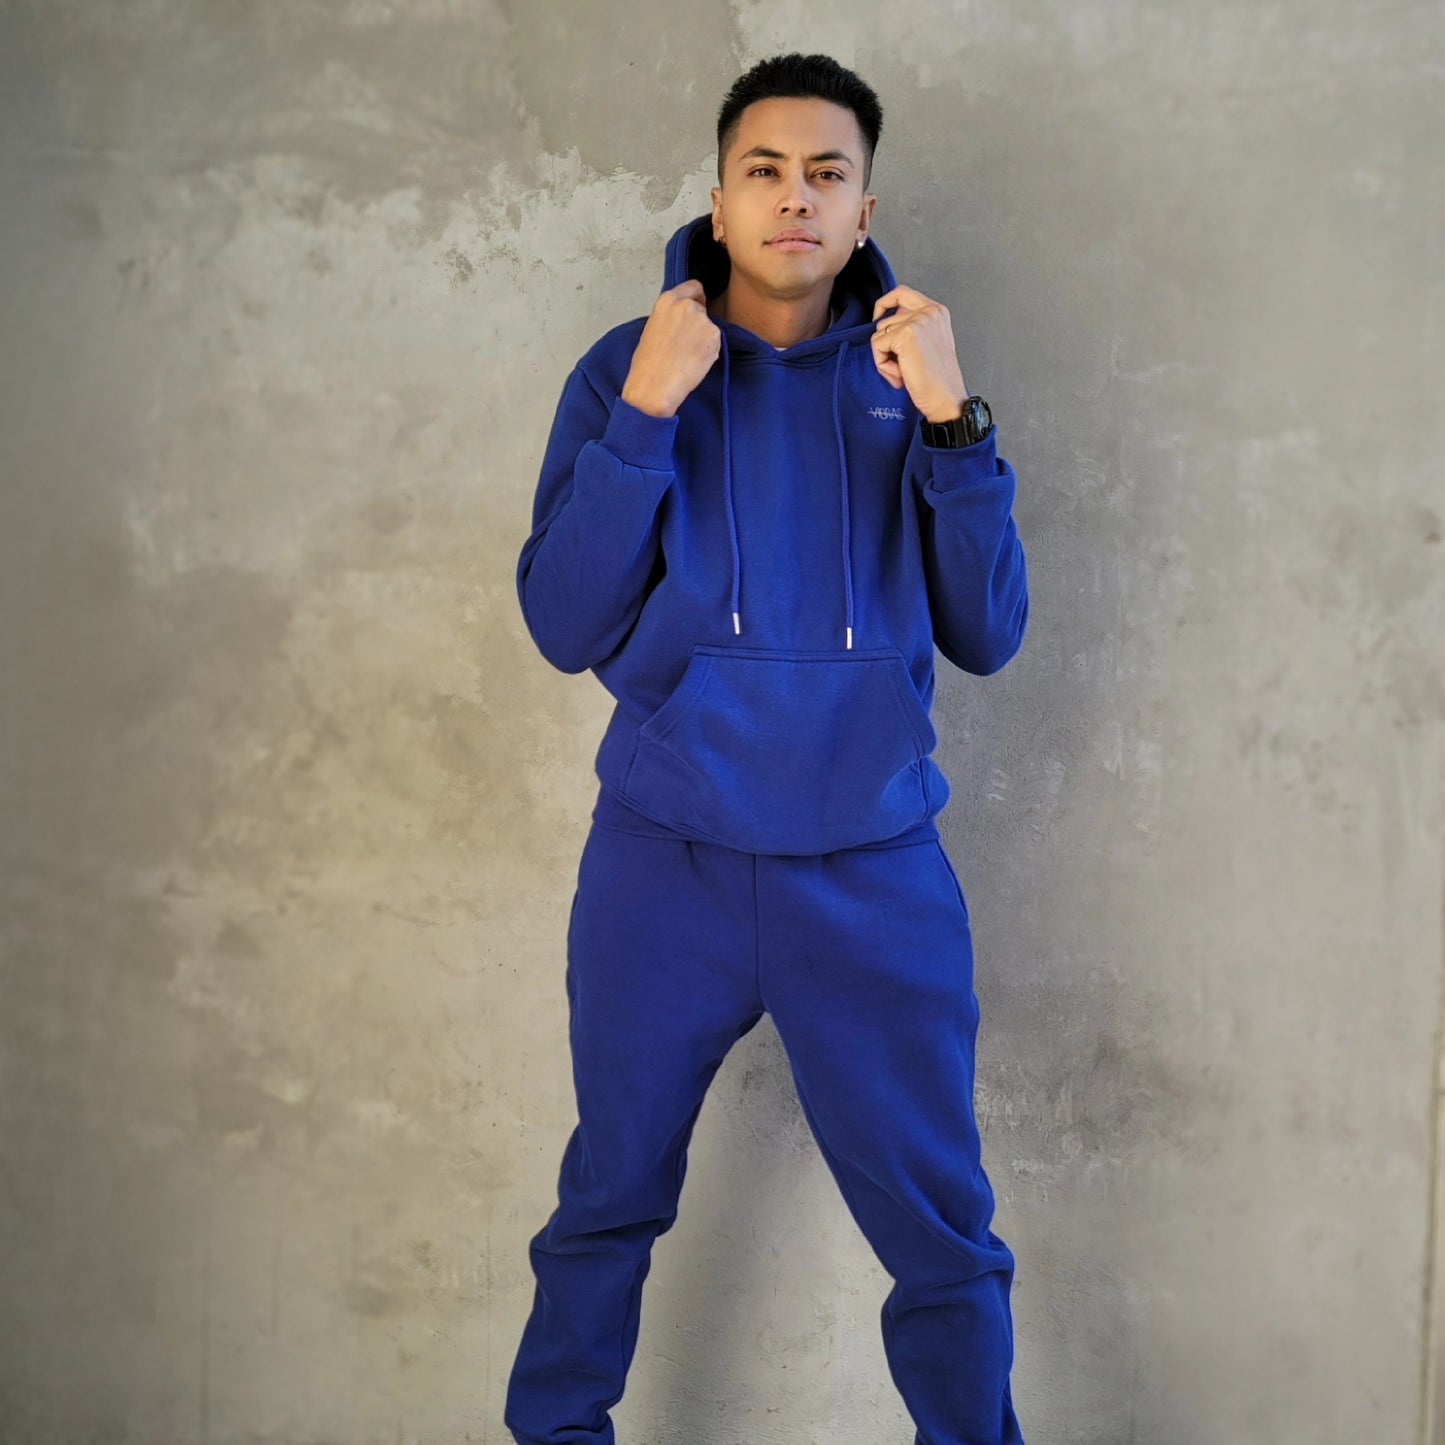 fitness male model wearing a vibrant blue, unisex matching tracksuit from Vibras Activewear.